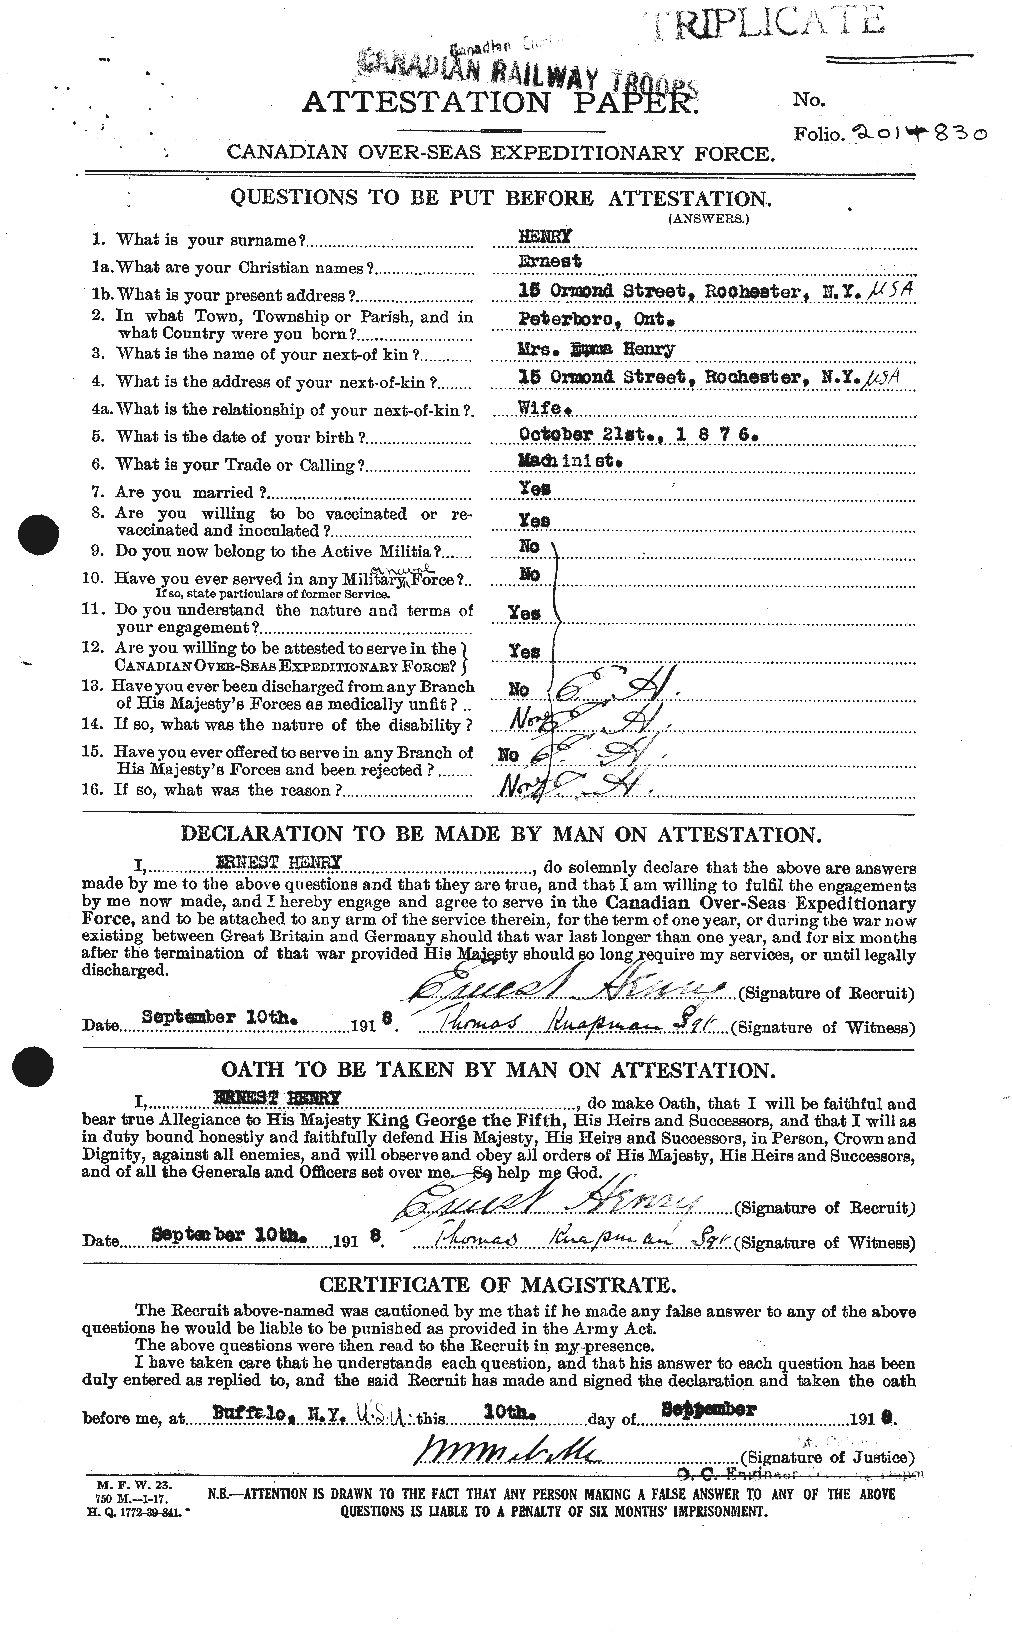 Personnel Records of the First World War - CEF 392849a